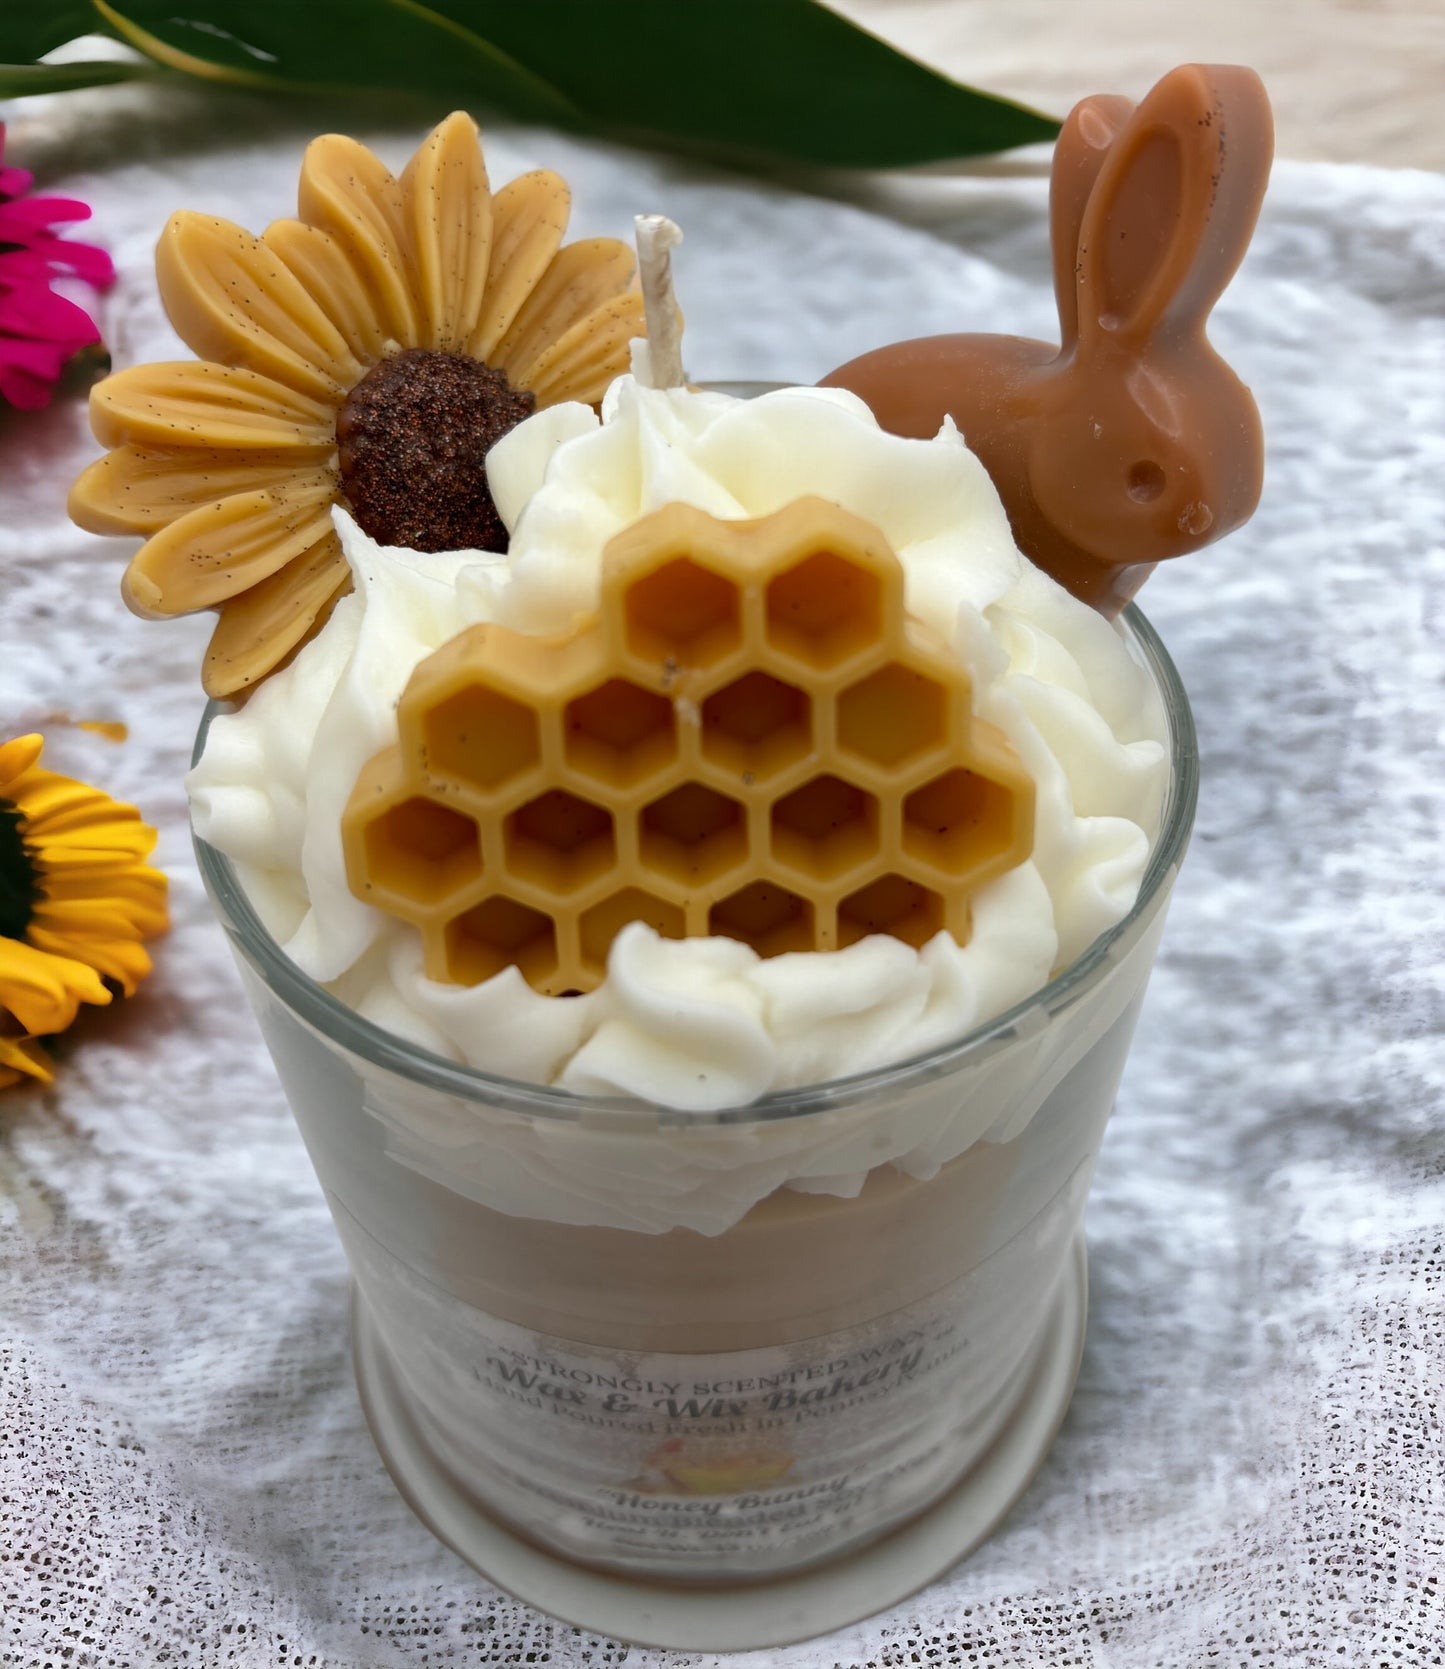 Honey Bunny Candle. 13 oz. Soy Candle/Bunny Rabbit, Honeycomb, Flower. Strongly Scented Soy Wax Candle